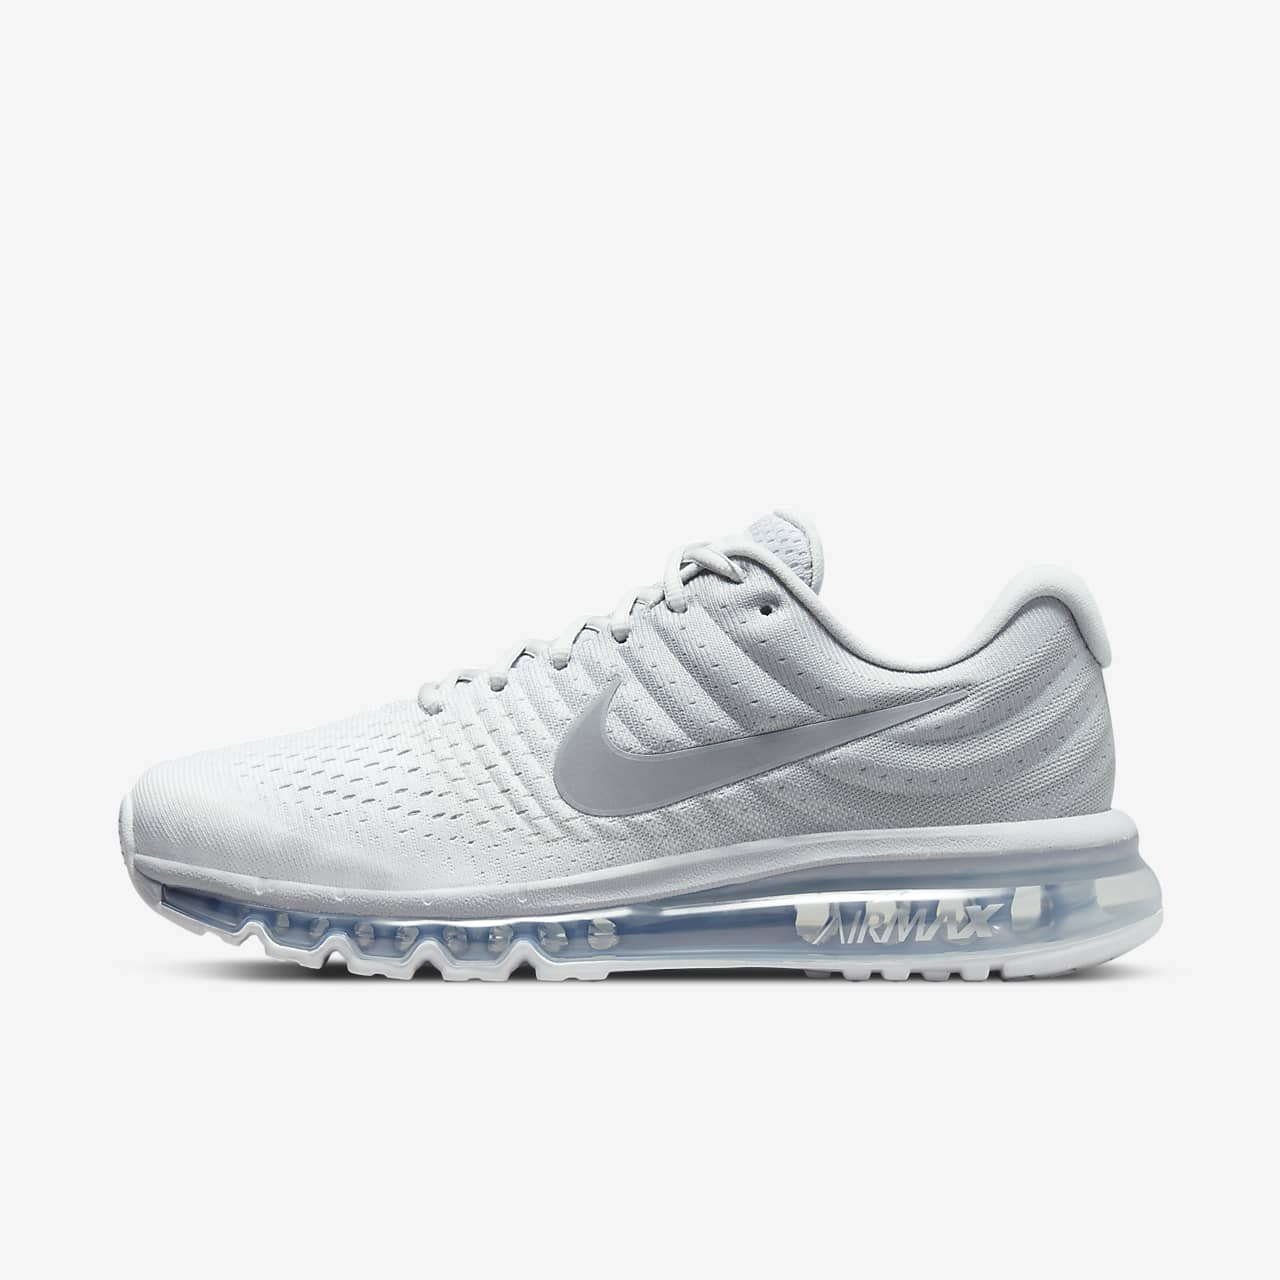 nike air max 2017 version 3 mens running trainers shoes